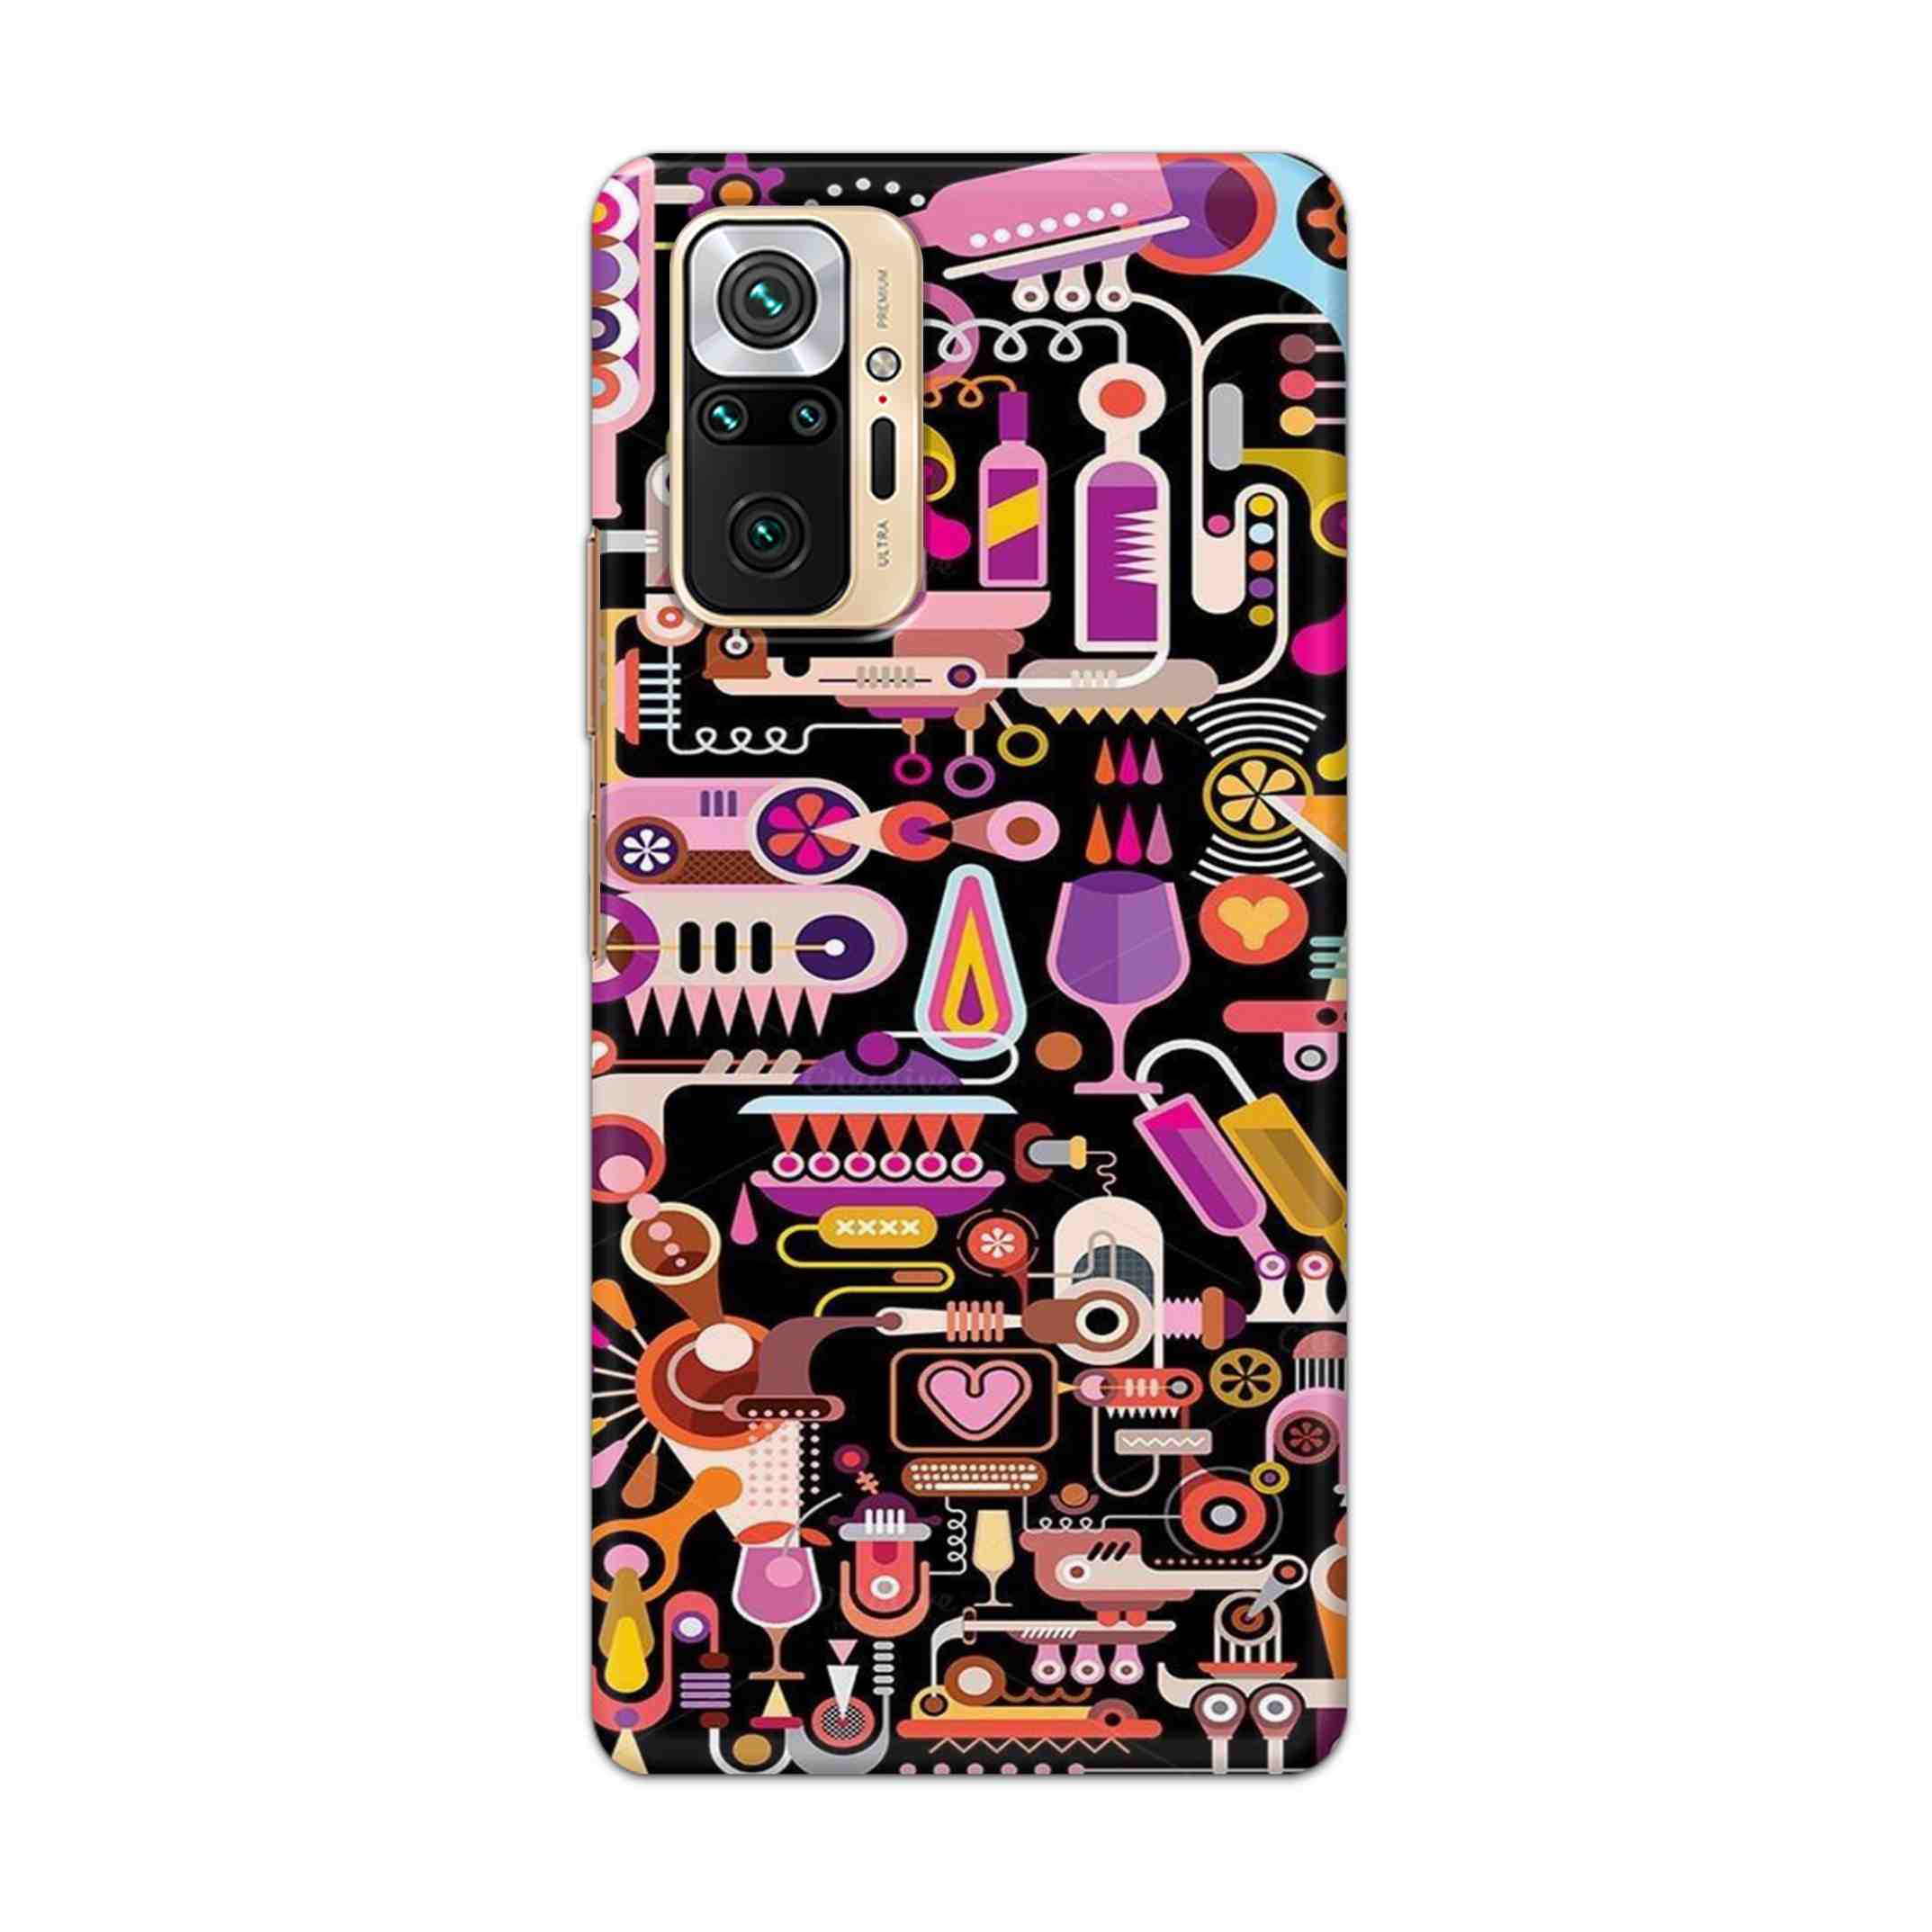 Buy Lab Art Hard Back Mobile Phone Case Cover For Redmi Note 10 Pro Online